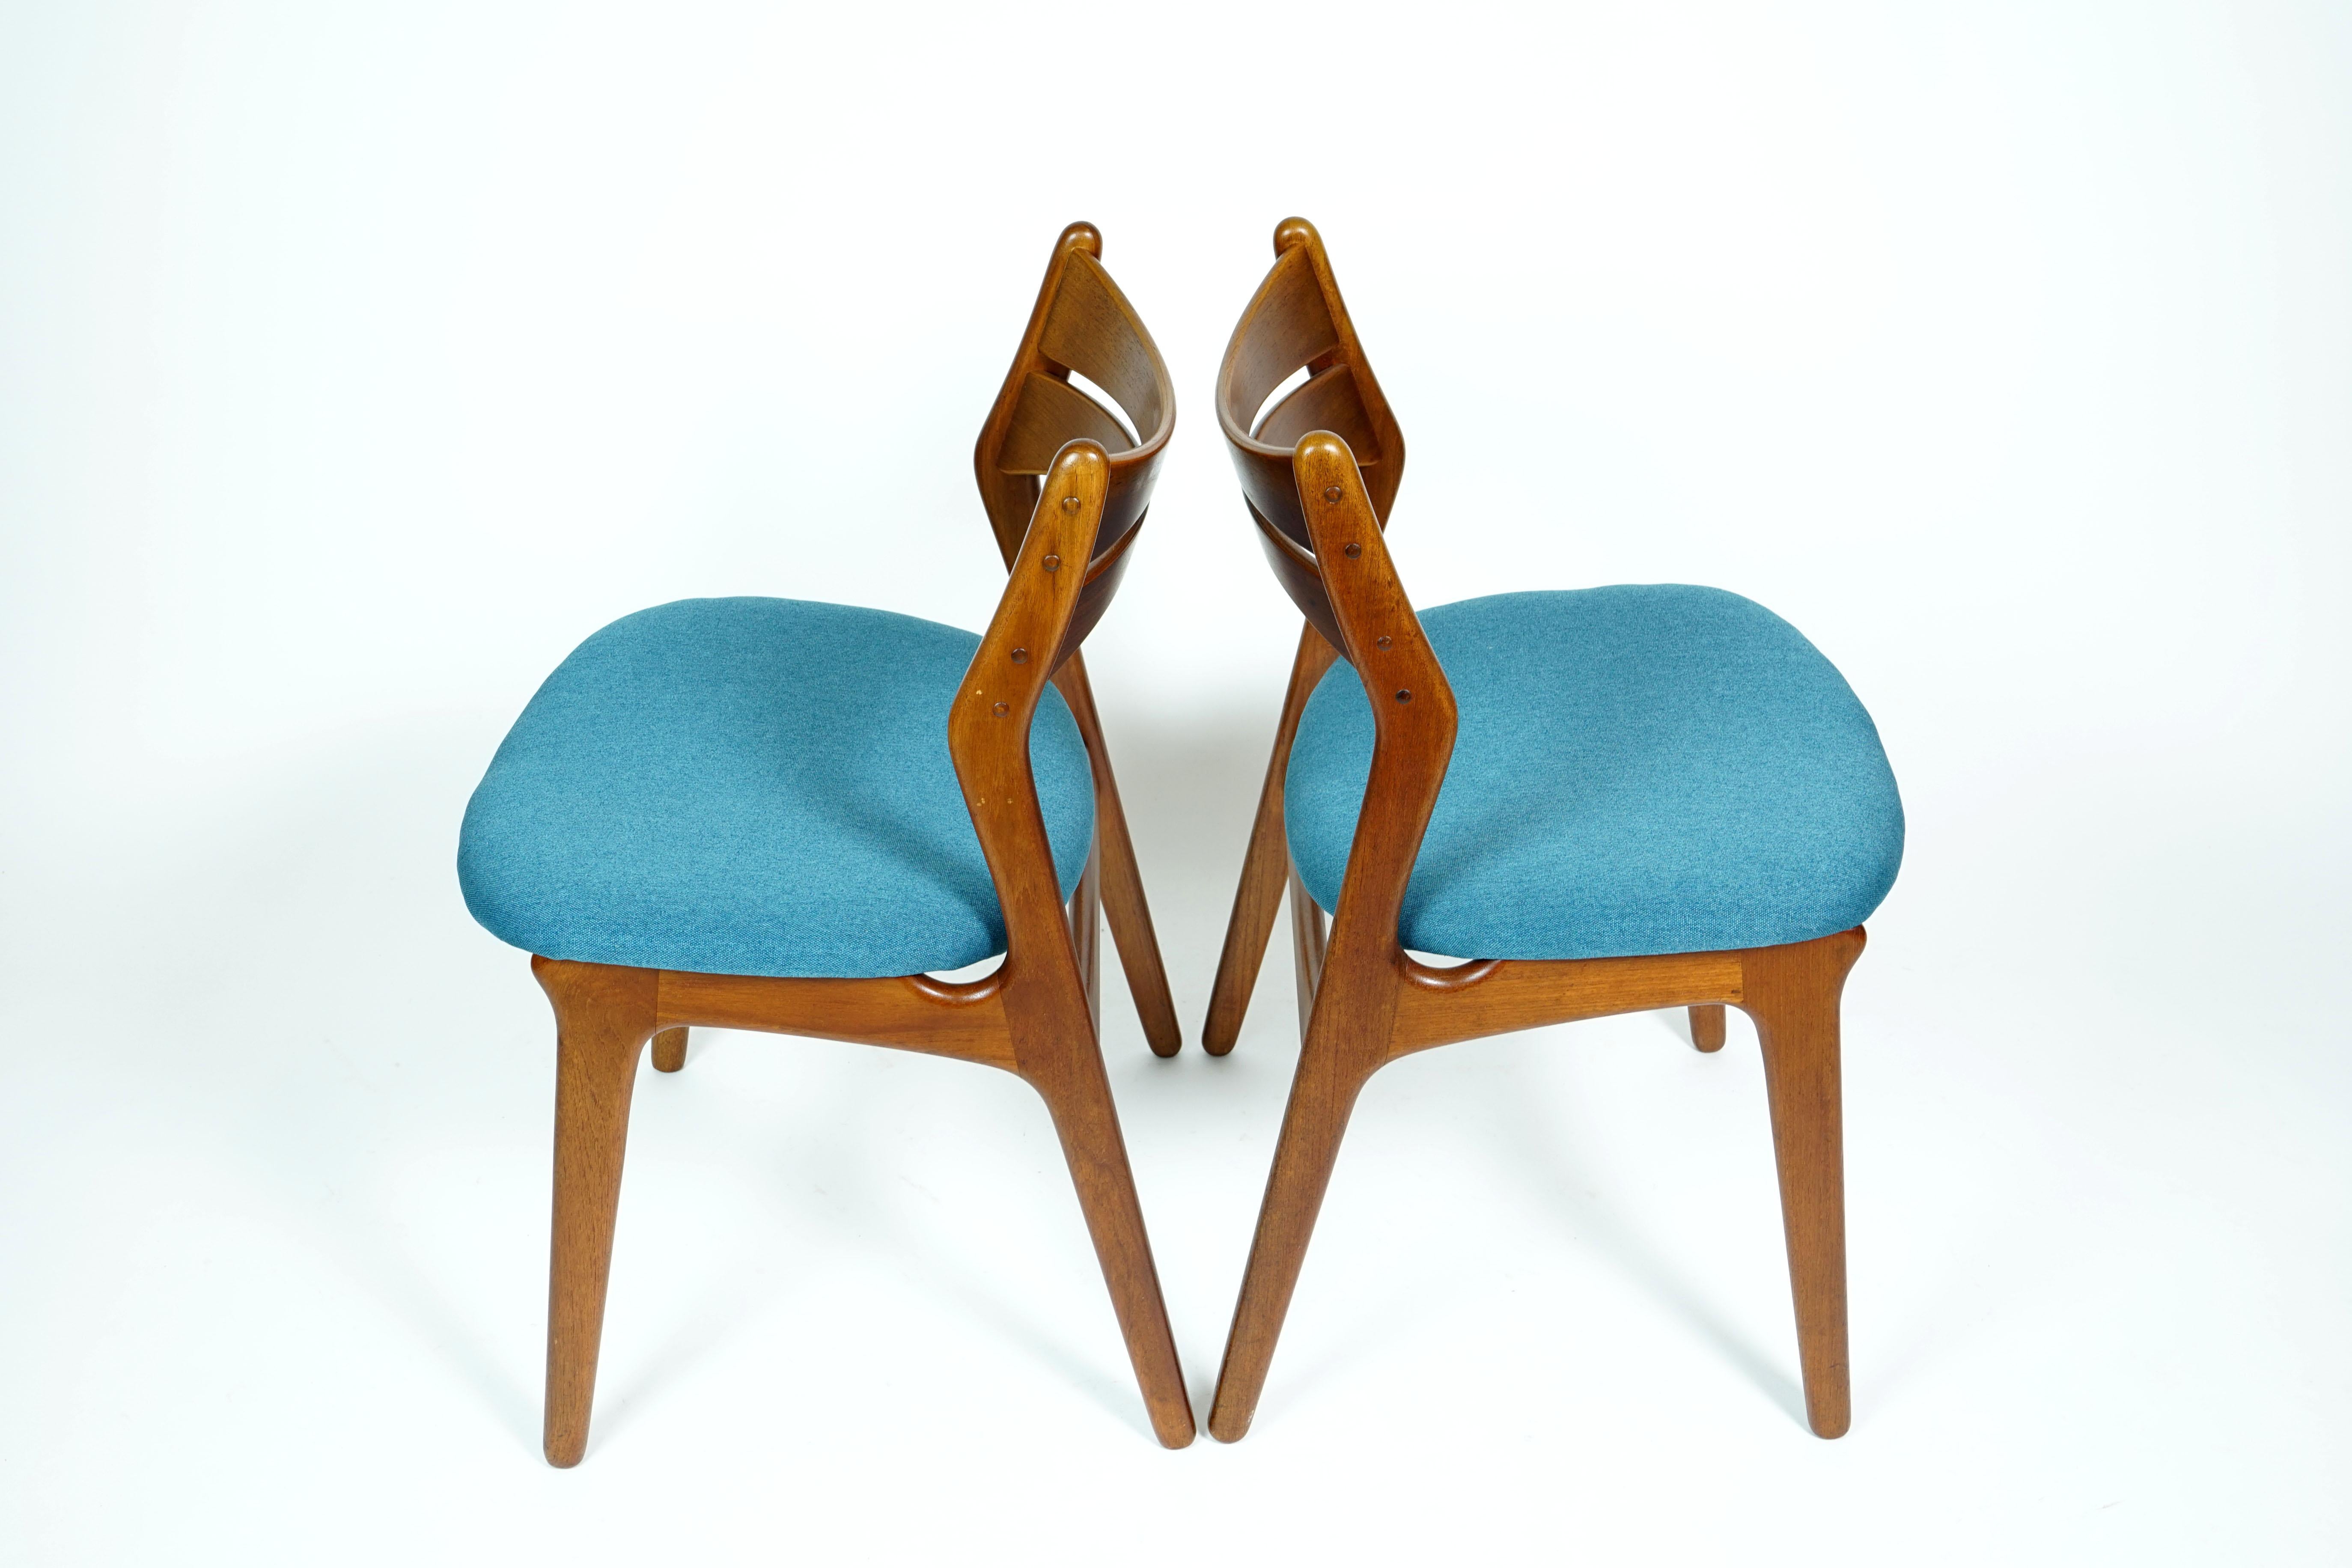 Wonderful set of five dining chairs model #310. The chairs are designed by Erik Buch for manufacturer Chr. Christiansen Møbelfabrik in the 1960s.

The rare and extraordinary chairs are completely restored and new upholstered with blue high-quality